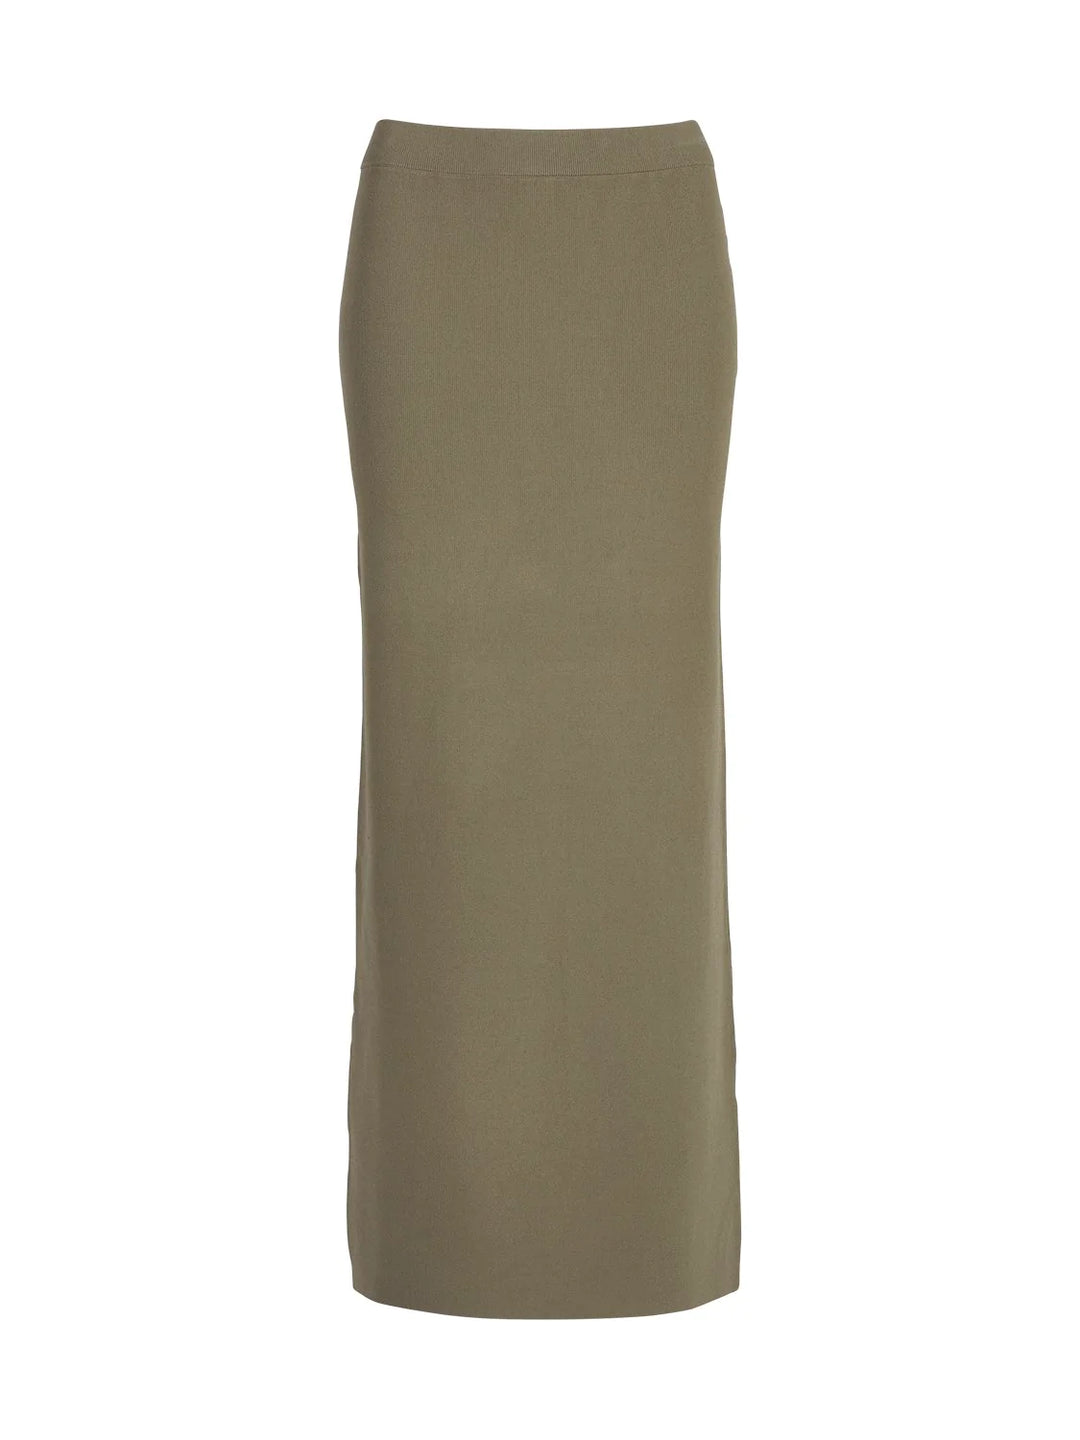 Ena Pelly Evie Luxe Knit Maxi Skirt - Olive